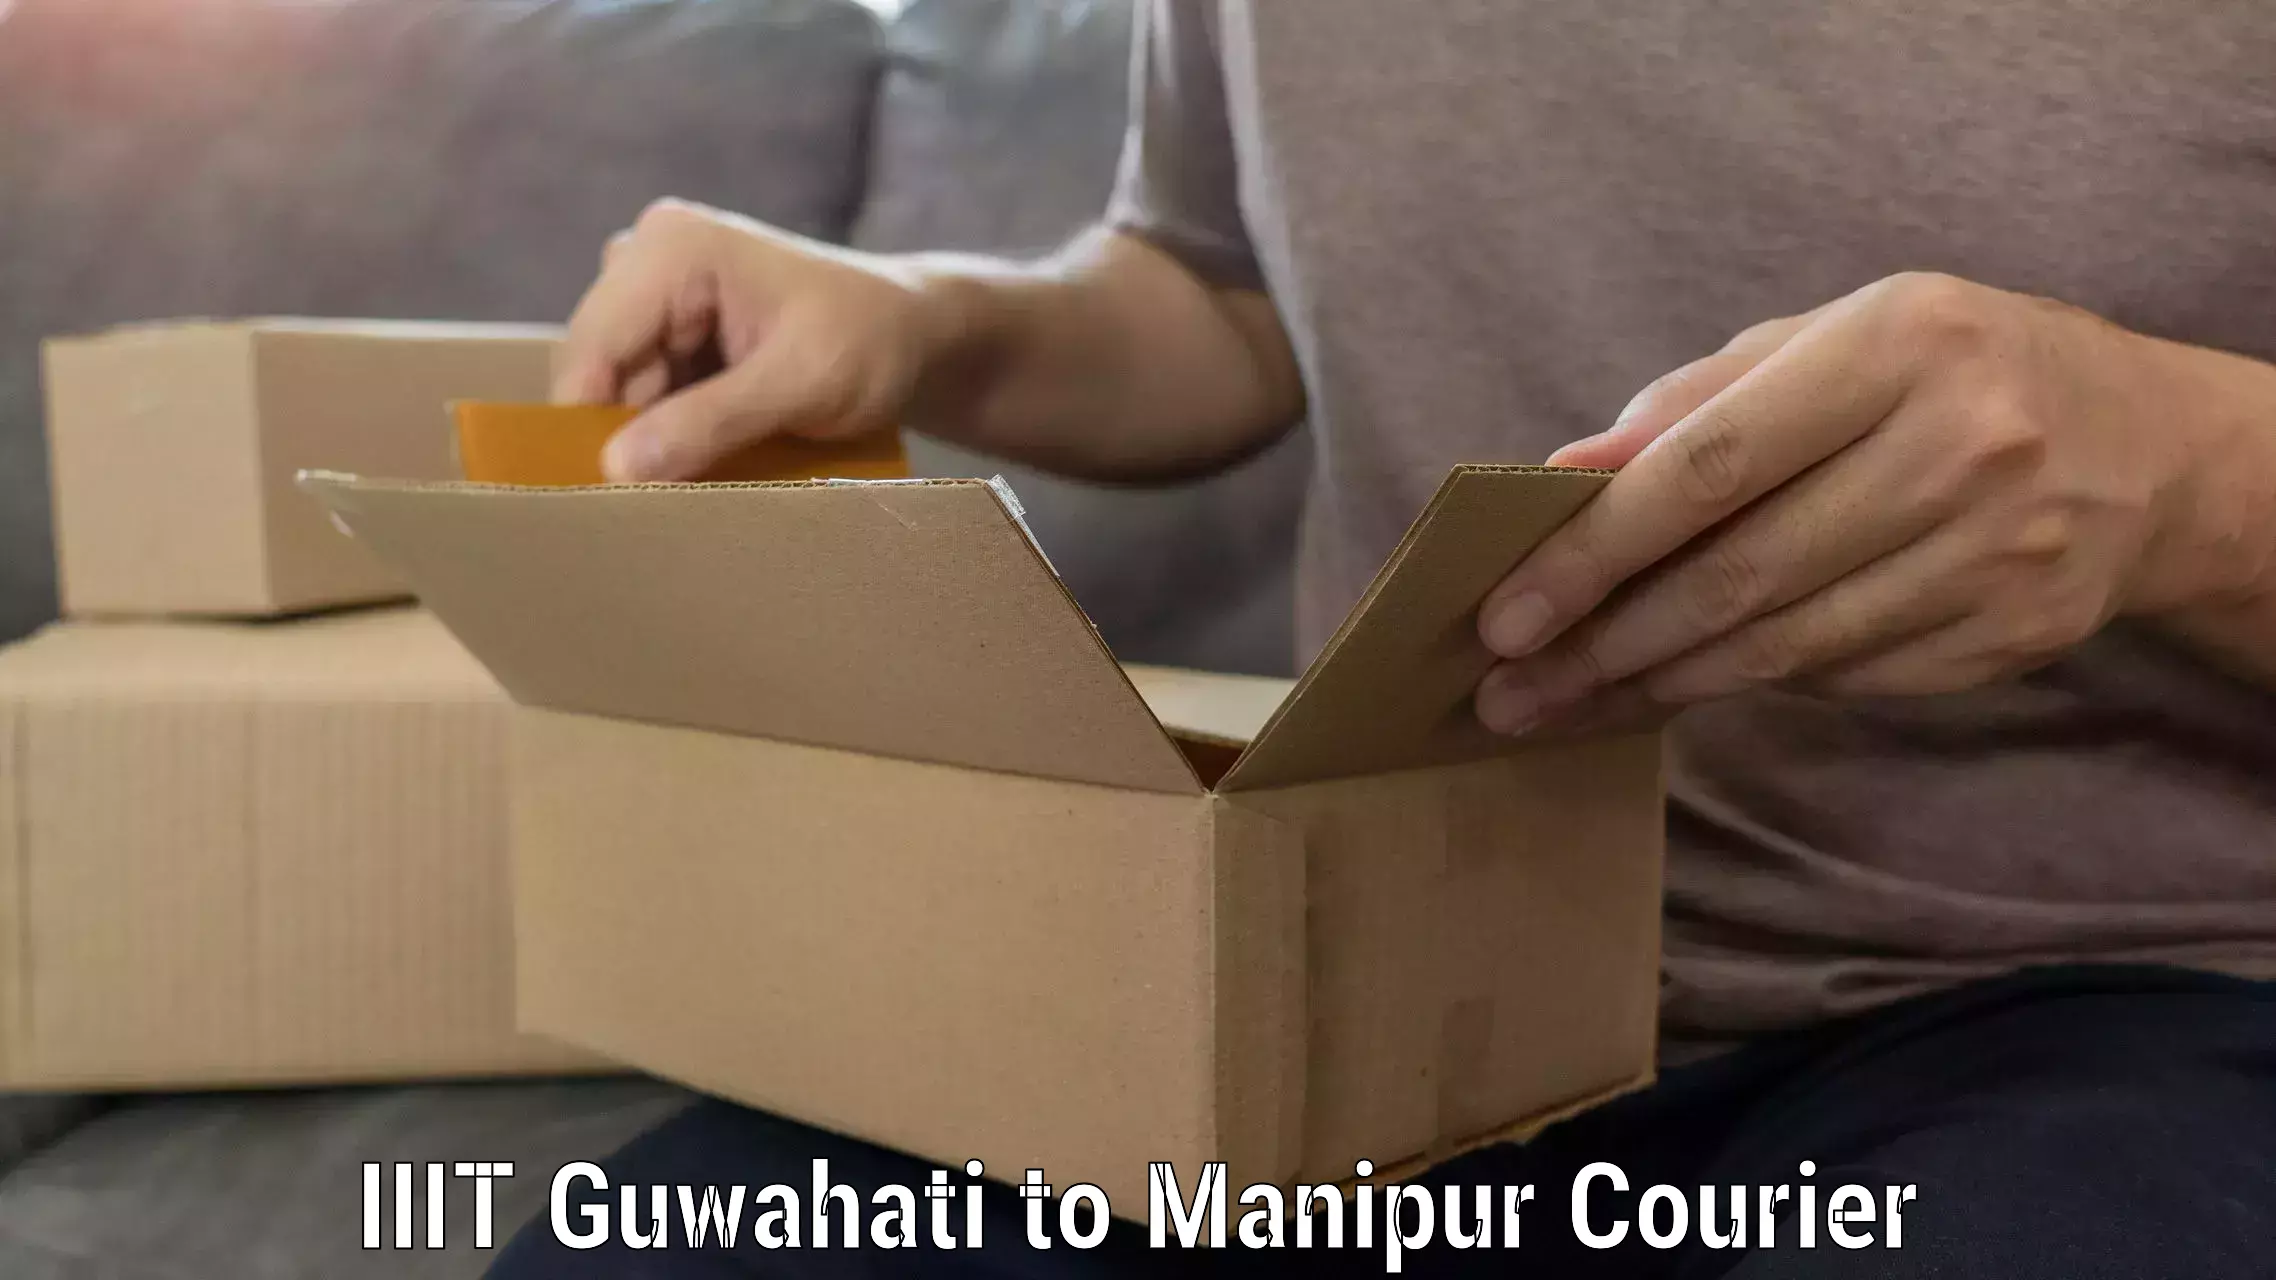 Budget-friendly moving services IIIT Guwahati to Moirang